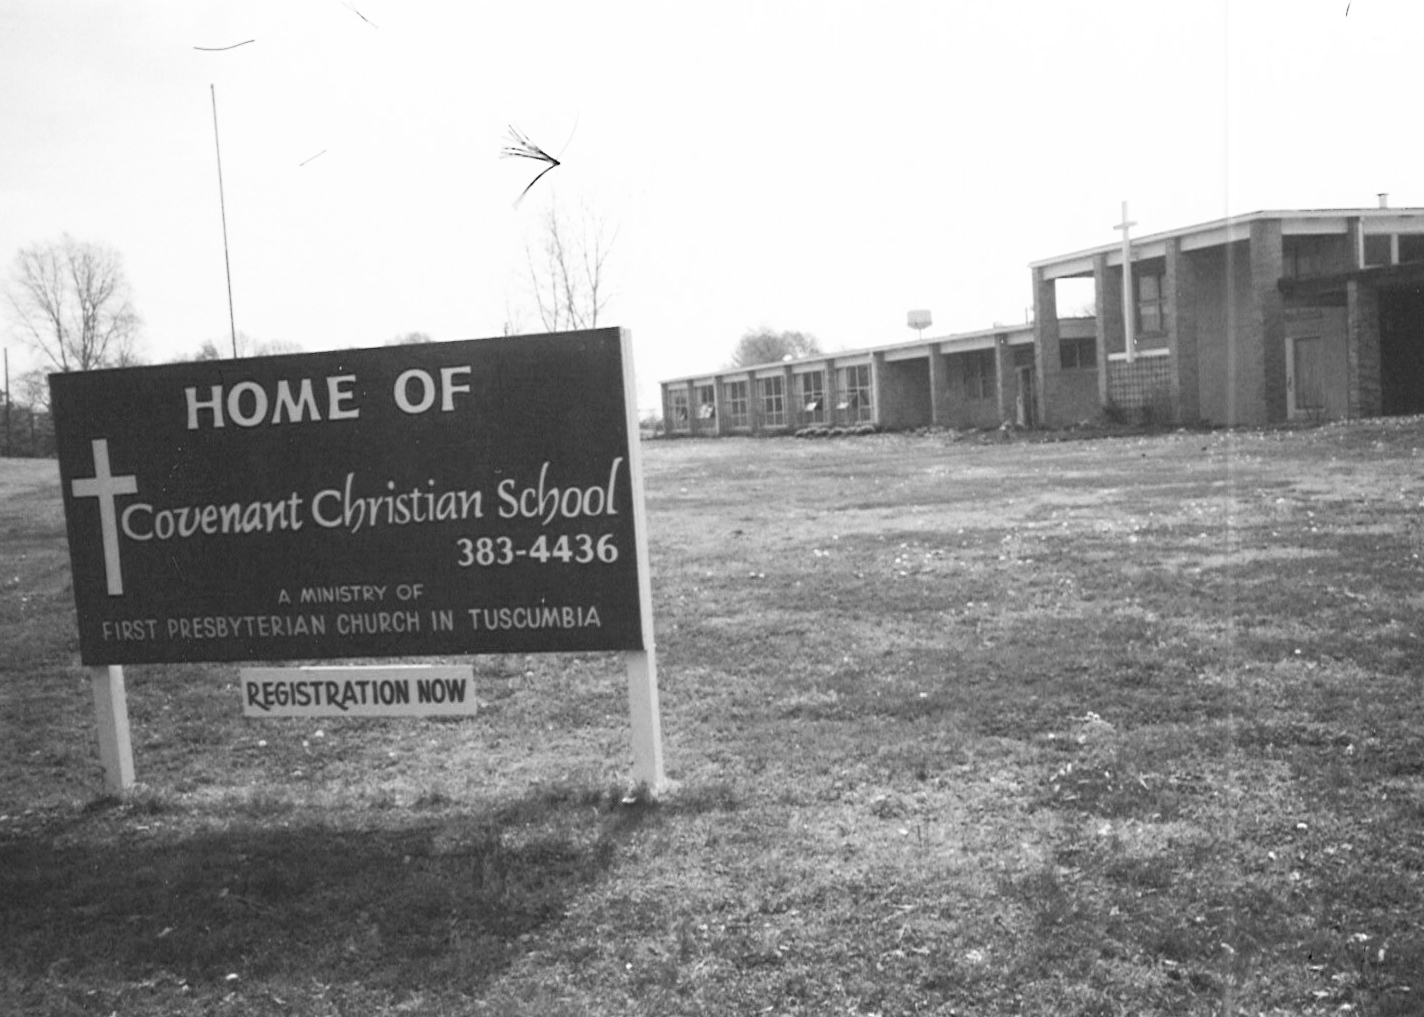 Home of Covenant Christian School